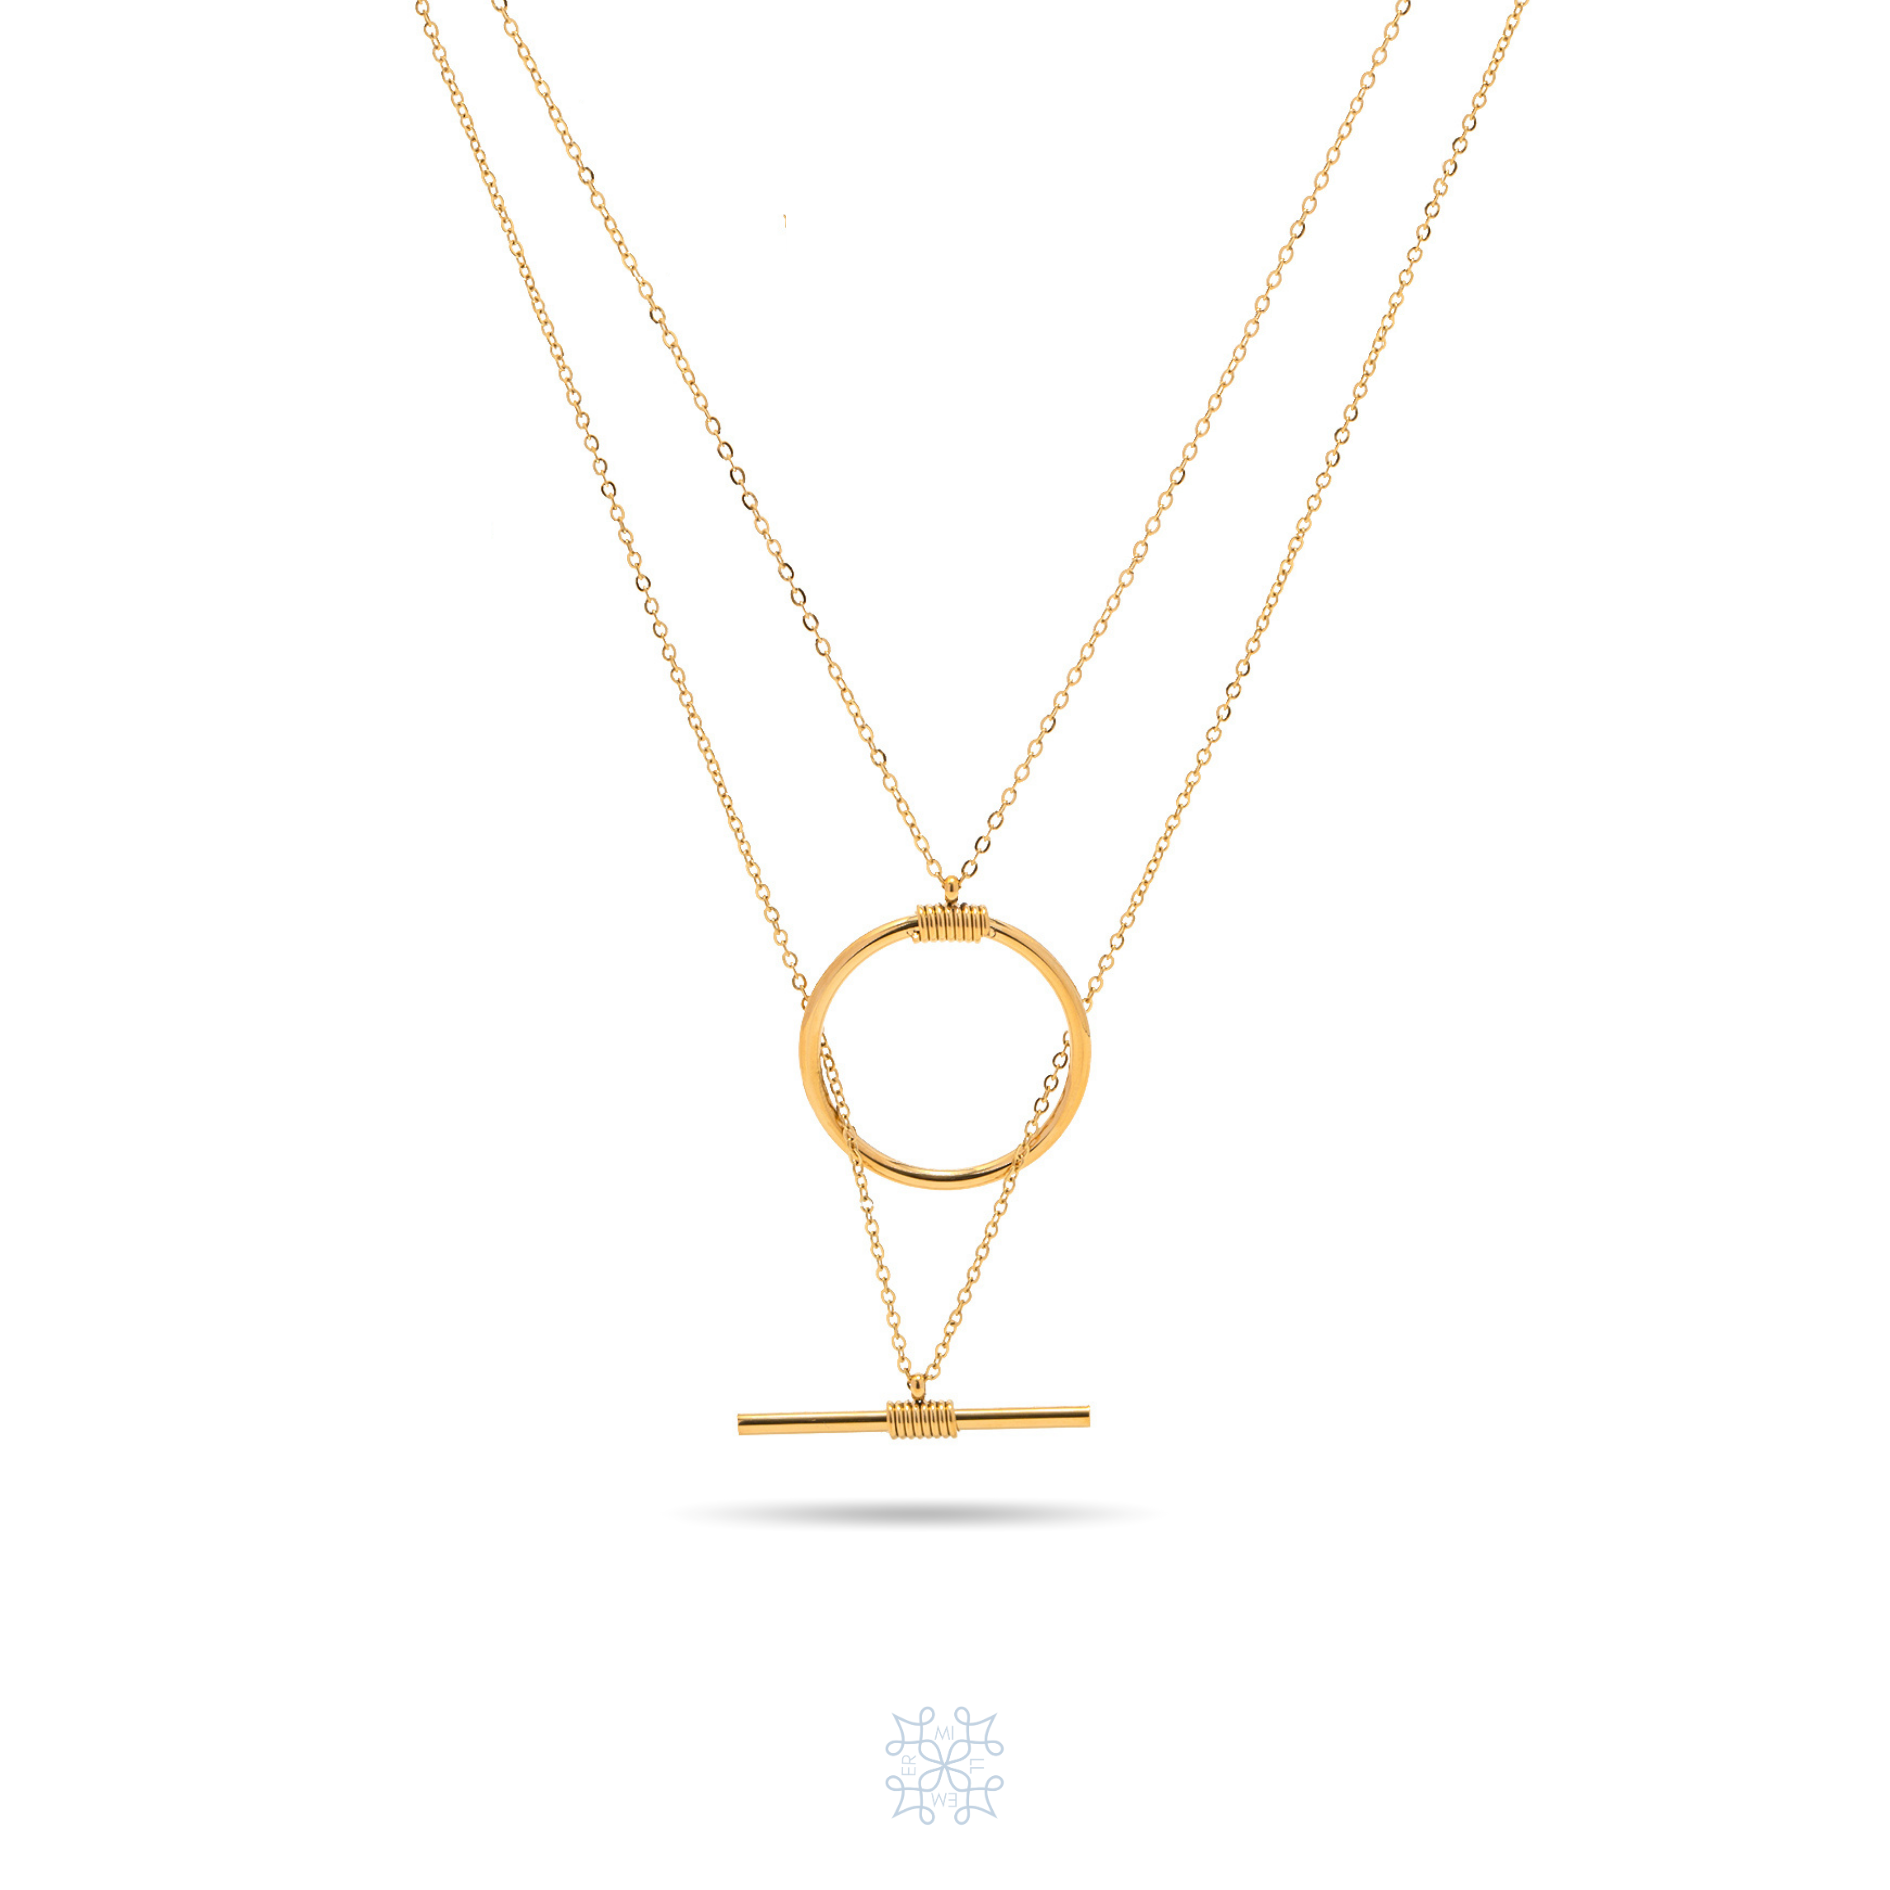 BALANCE Pendants Gold Necklace -gold pendant consisting of two parts. One chain has a metal hanging in the shape of a circle which comes shorter and the other chain has a horizontal metal hanging which comes longe